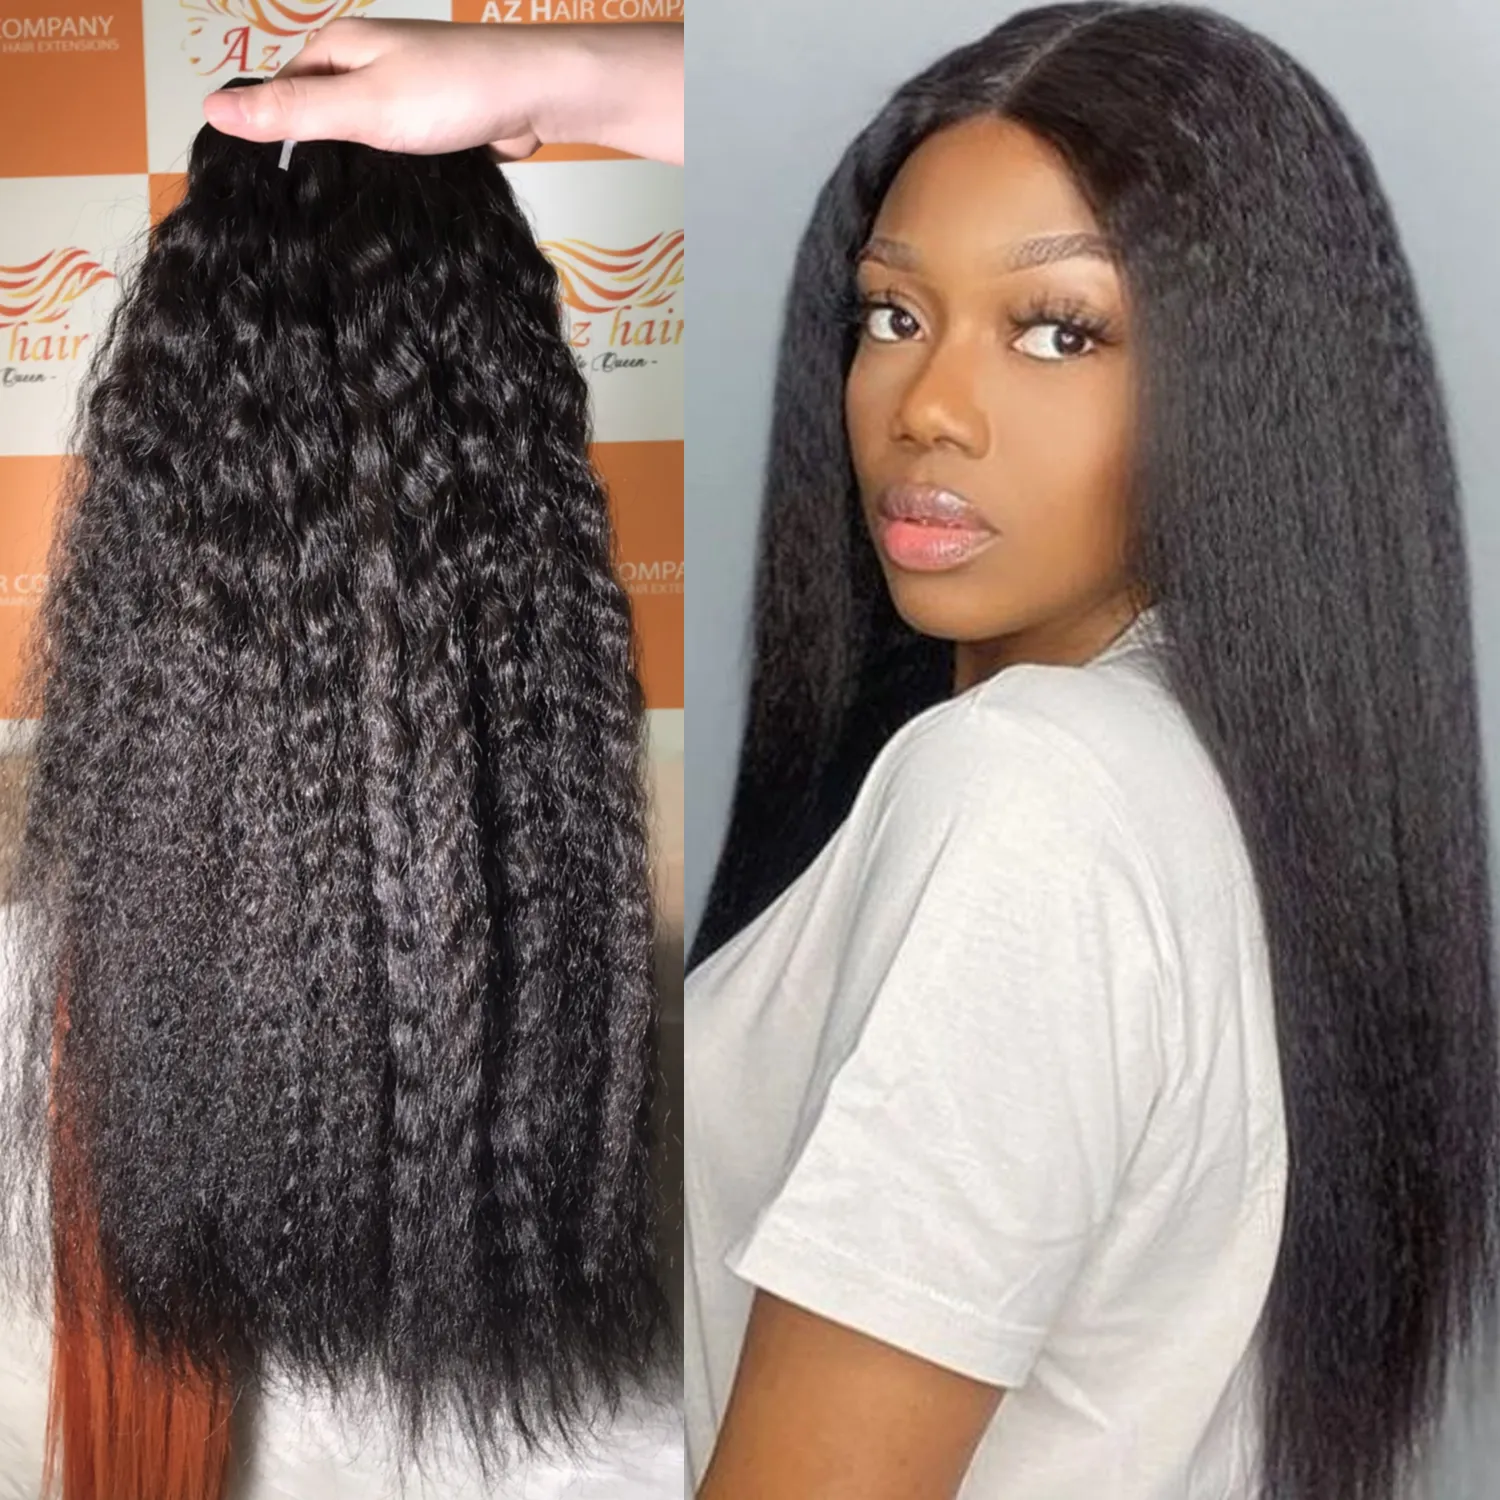 Yaki Straight Hair Bundles 100% Vietnamese Raw Human Hair Remy Weft Factory Wholesales Price From 8 - 30 Inches